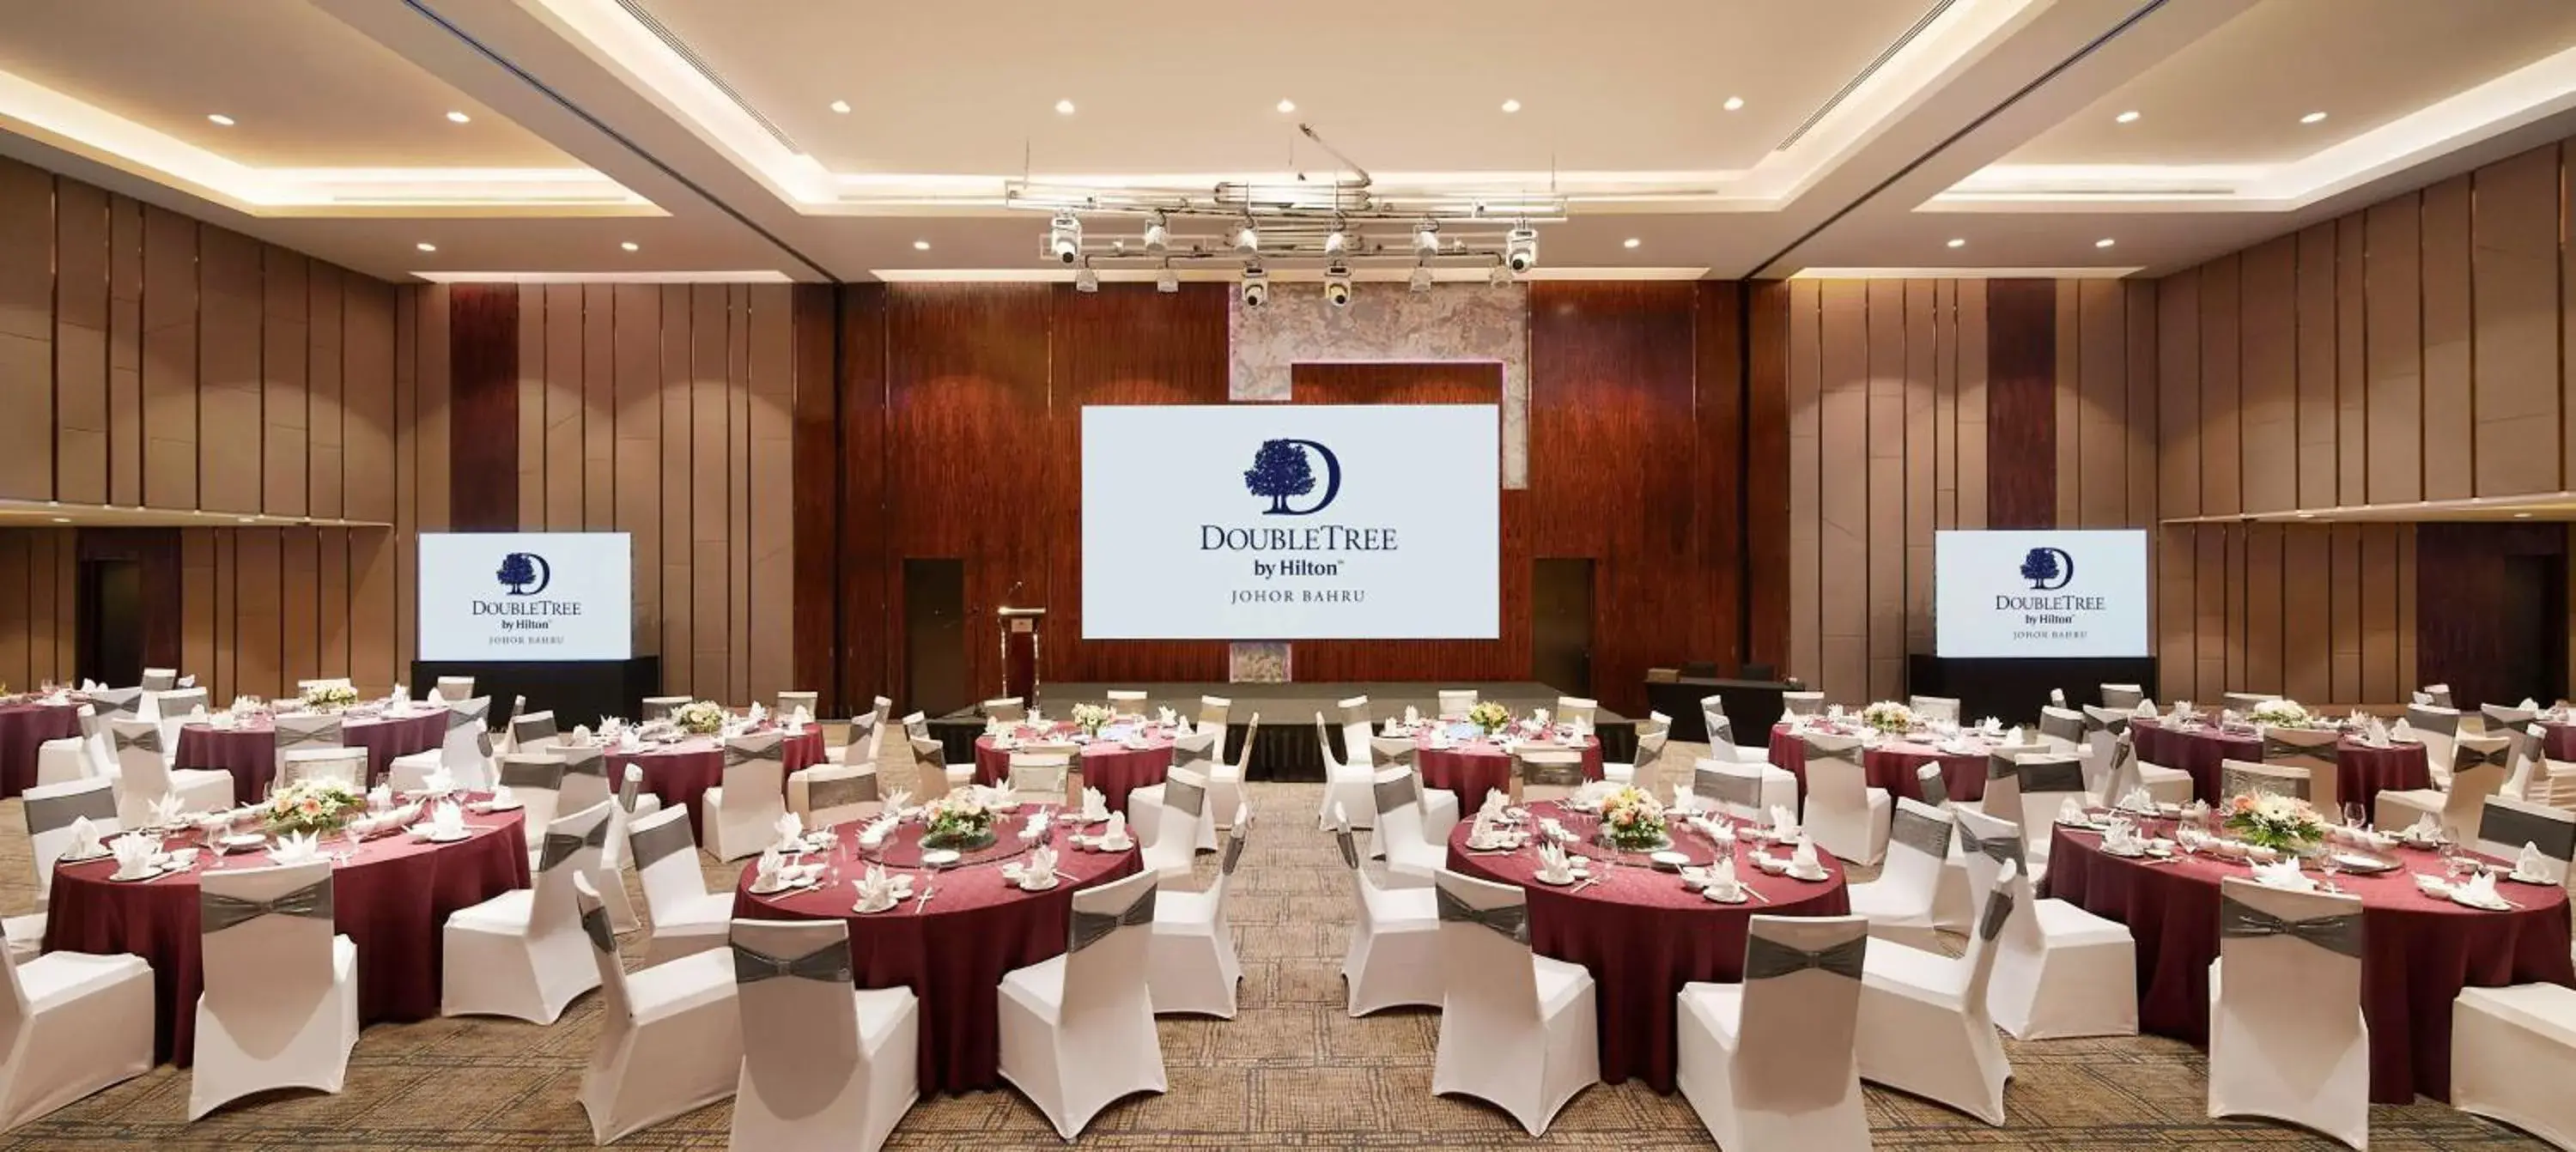 Meeting/conference room, Banquet Facilities in DoubleTree by Hilton Johor Bahru